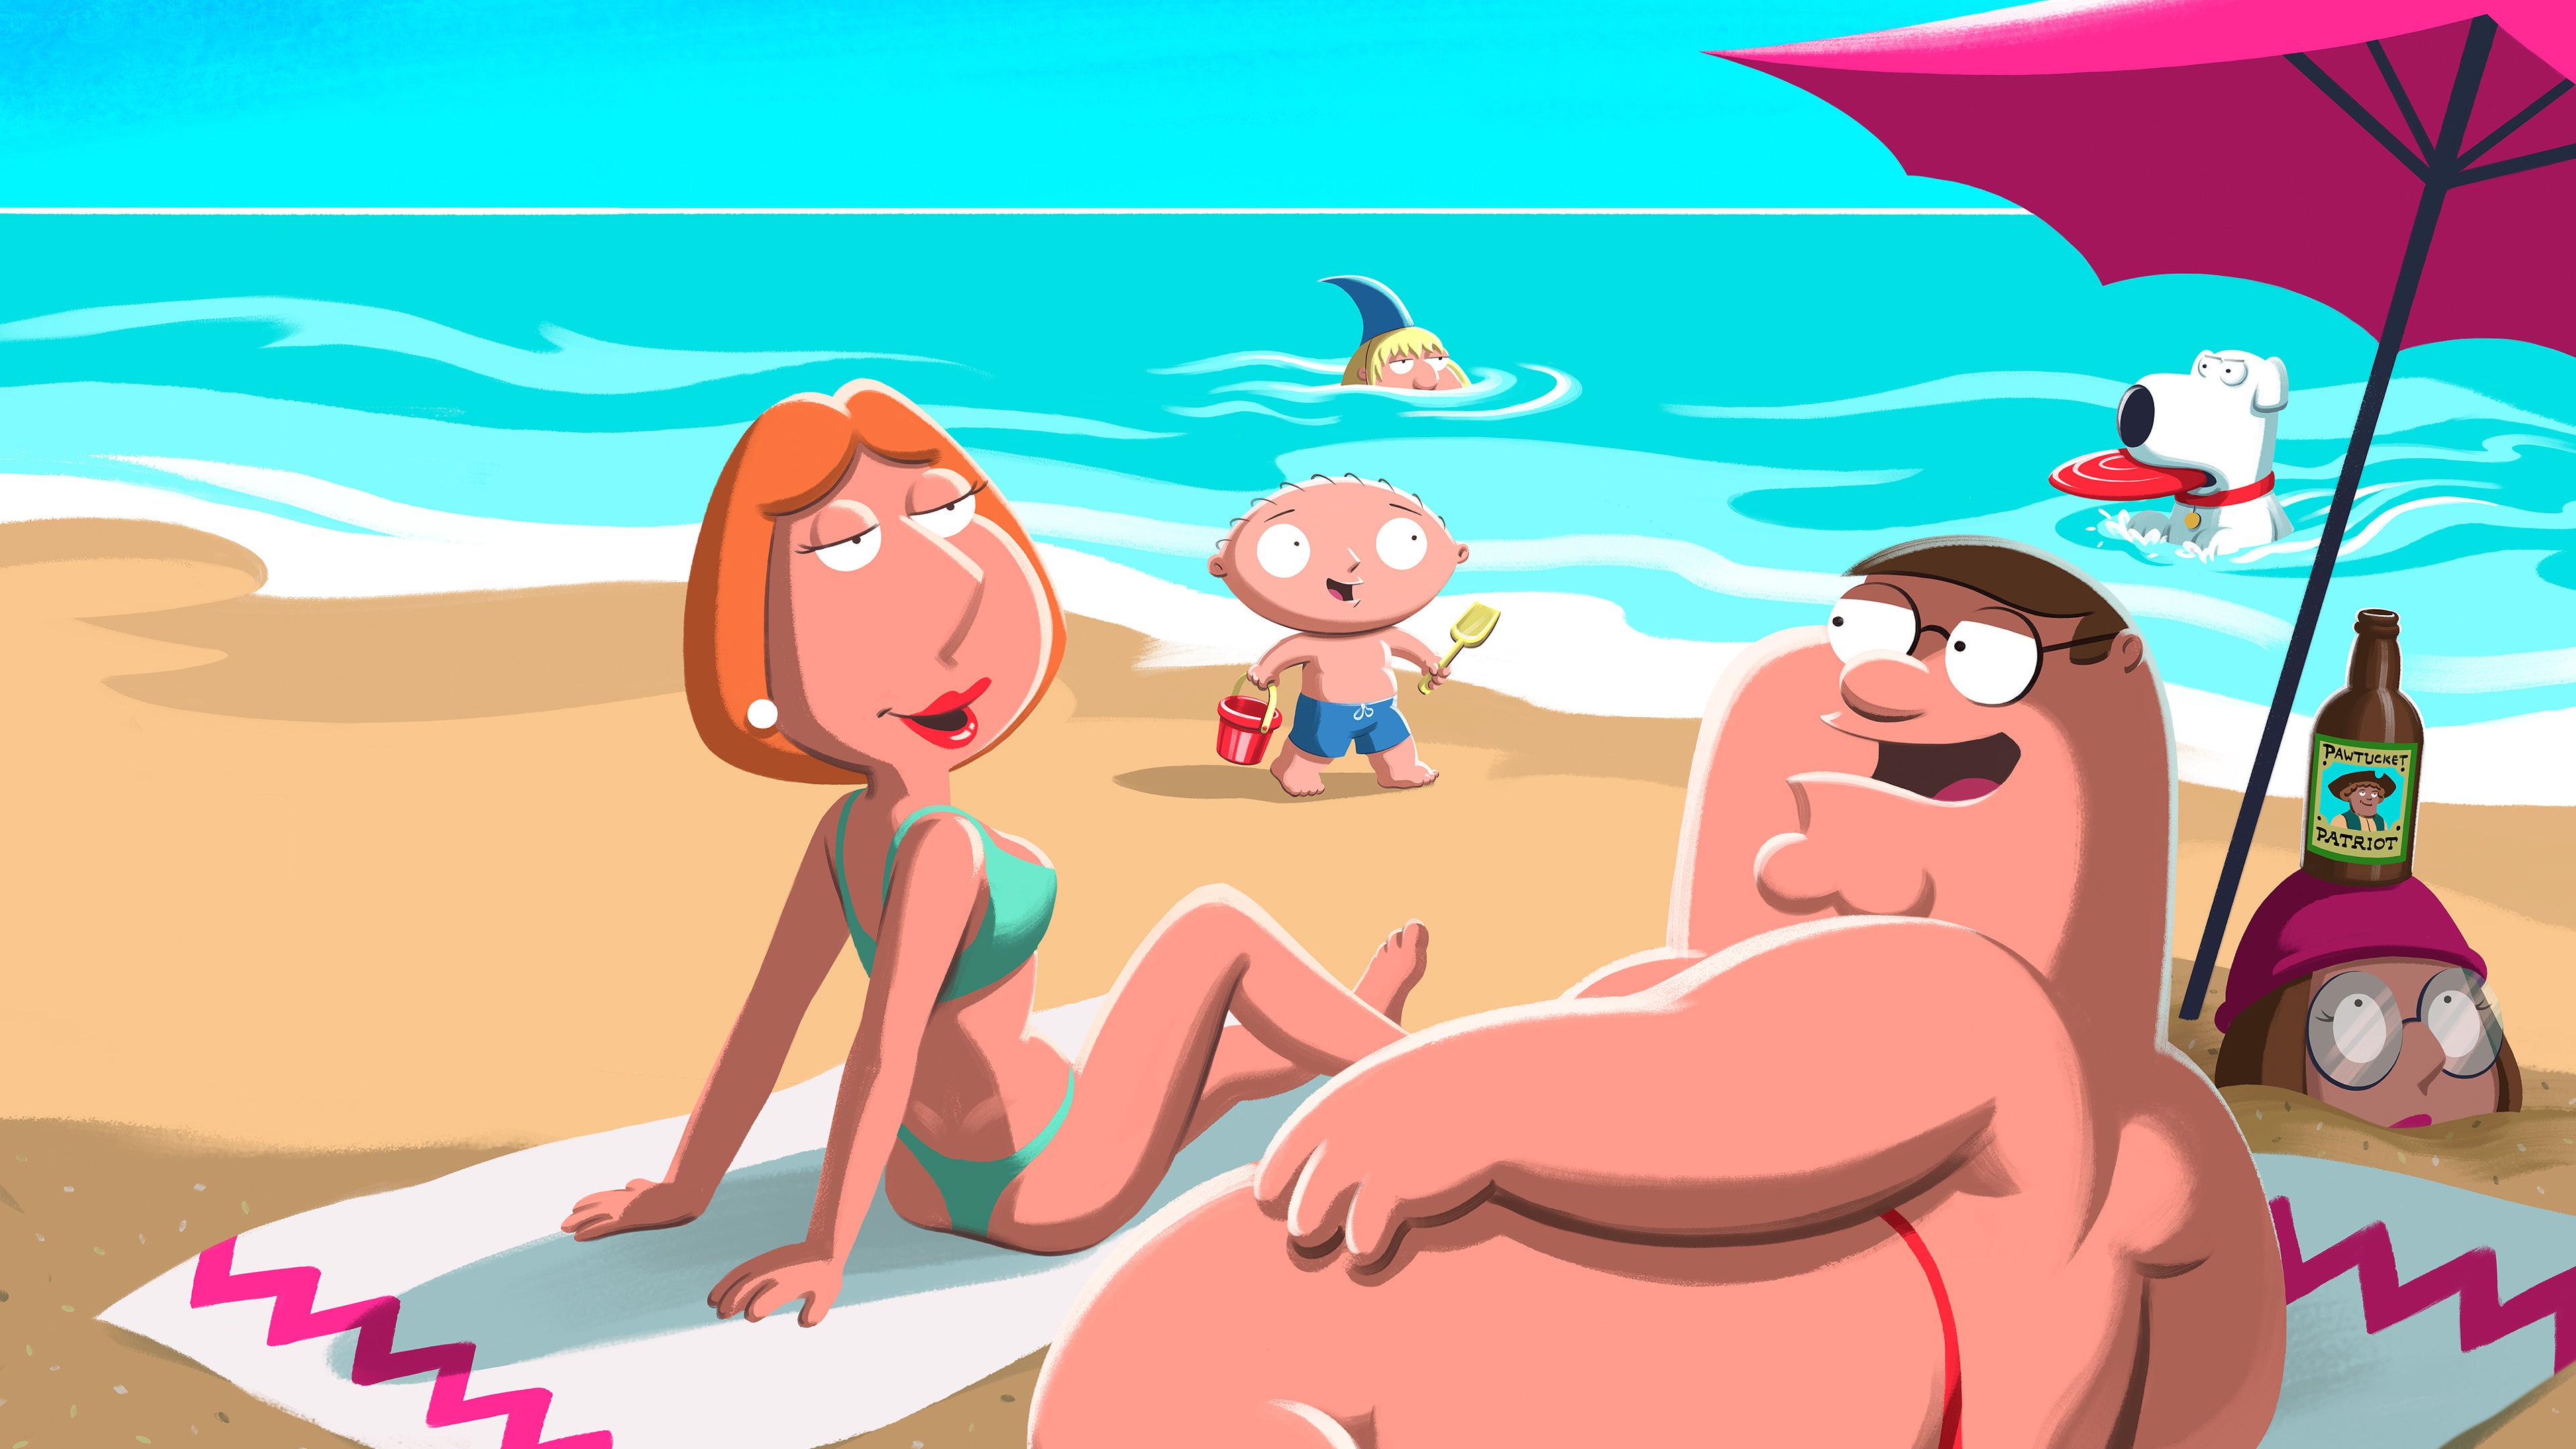 dipesh jethwa recommends lois and quagmire doing it pic